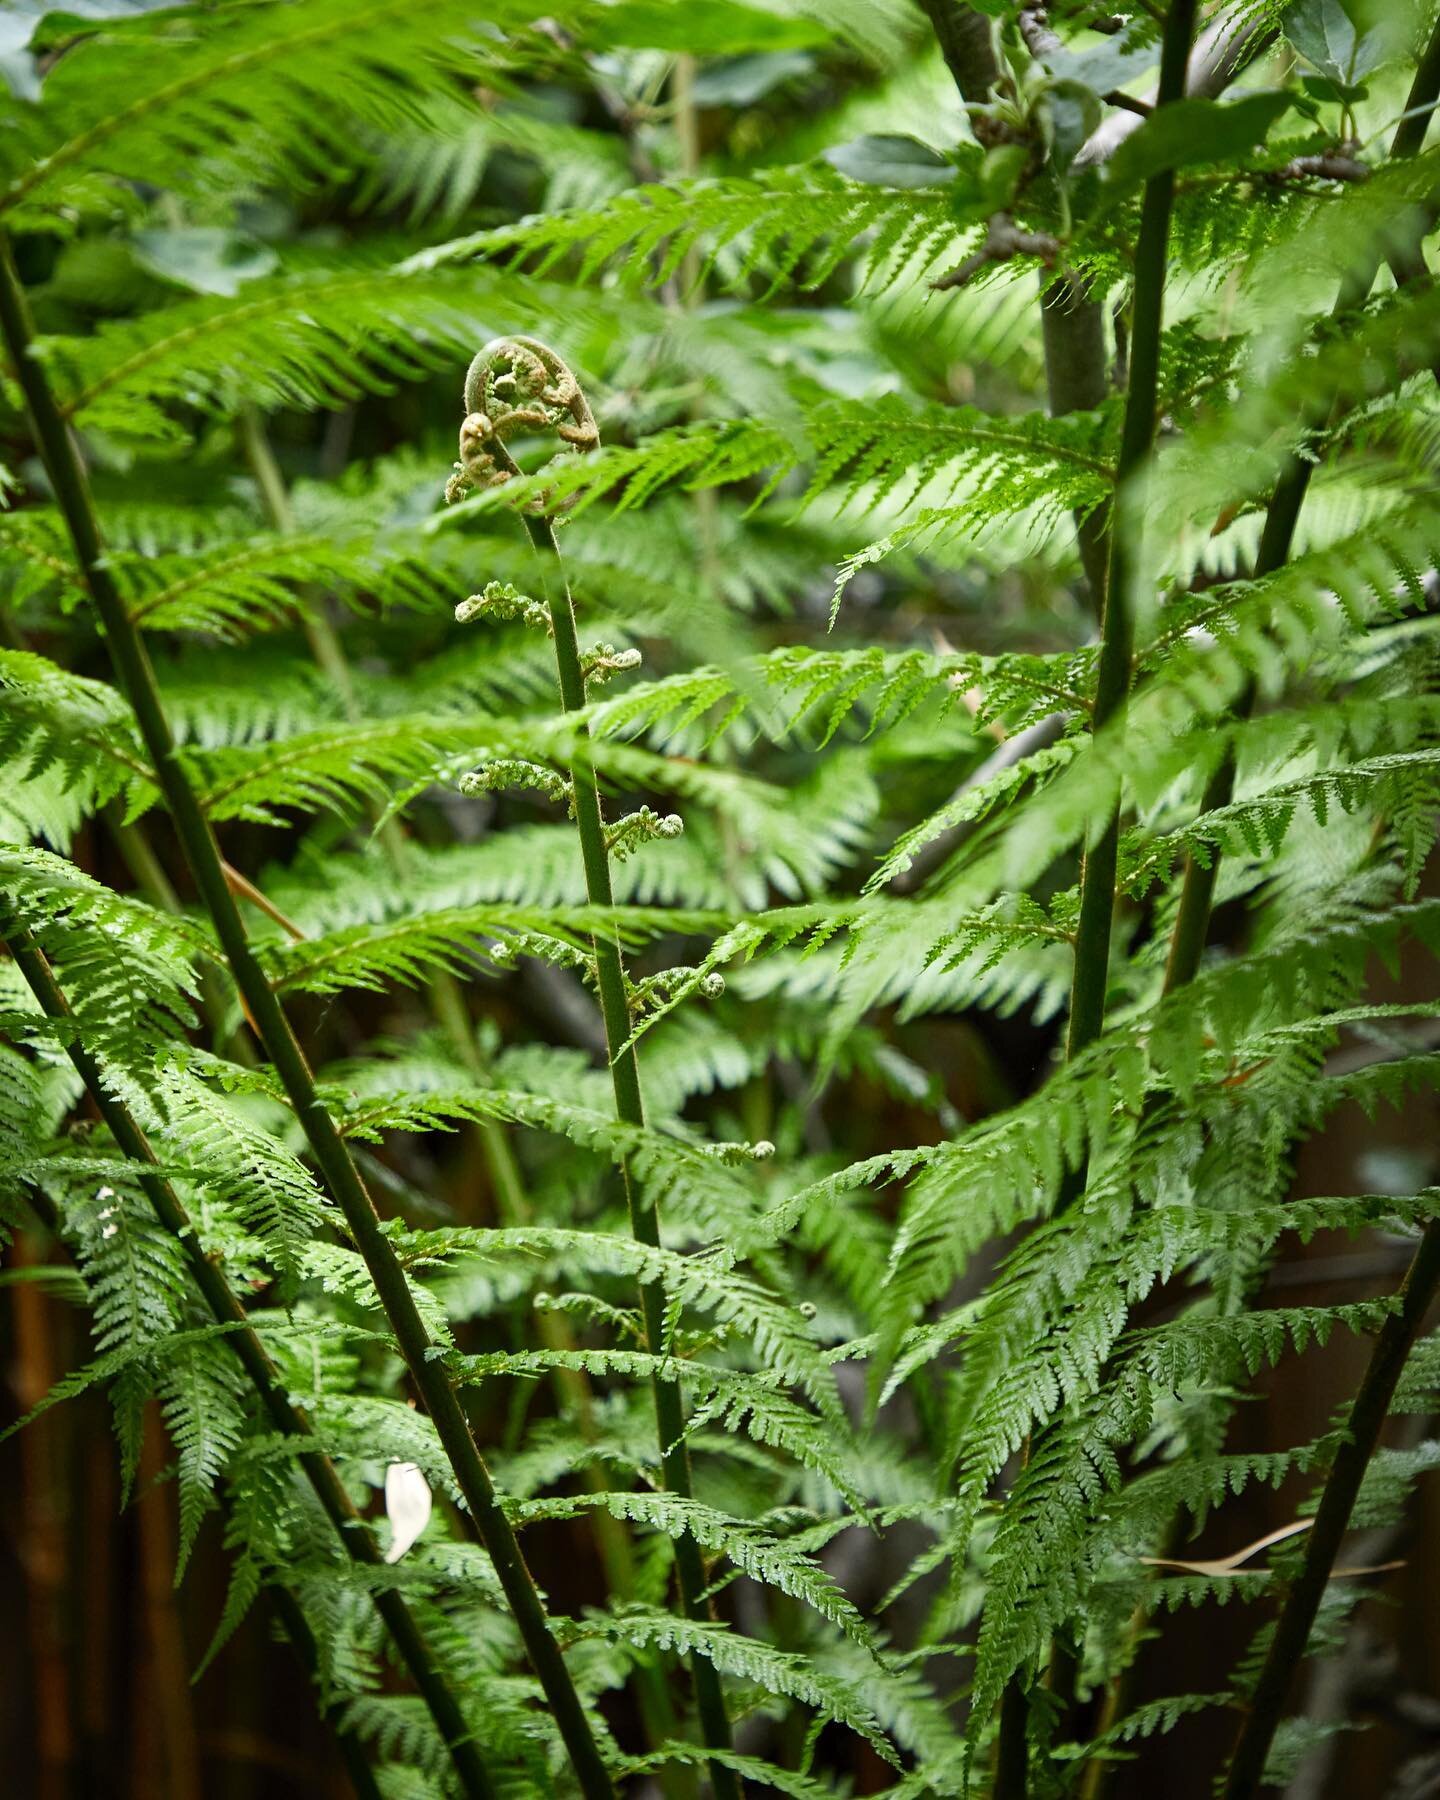 Dicksonia antartica 🌿🌱

Captured here by @alistergthorpe 
________________________________

#tree #fern #green #structure #texture #london #create #inspire #form #green #grdn #garden #design #architecture #home #renovation #outdoors #planting #plan